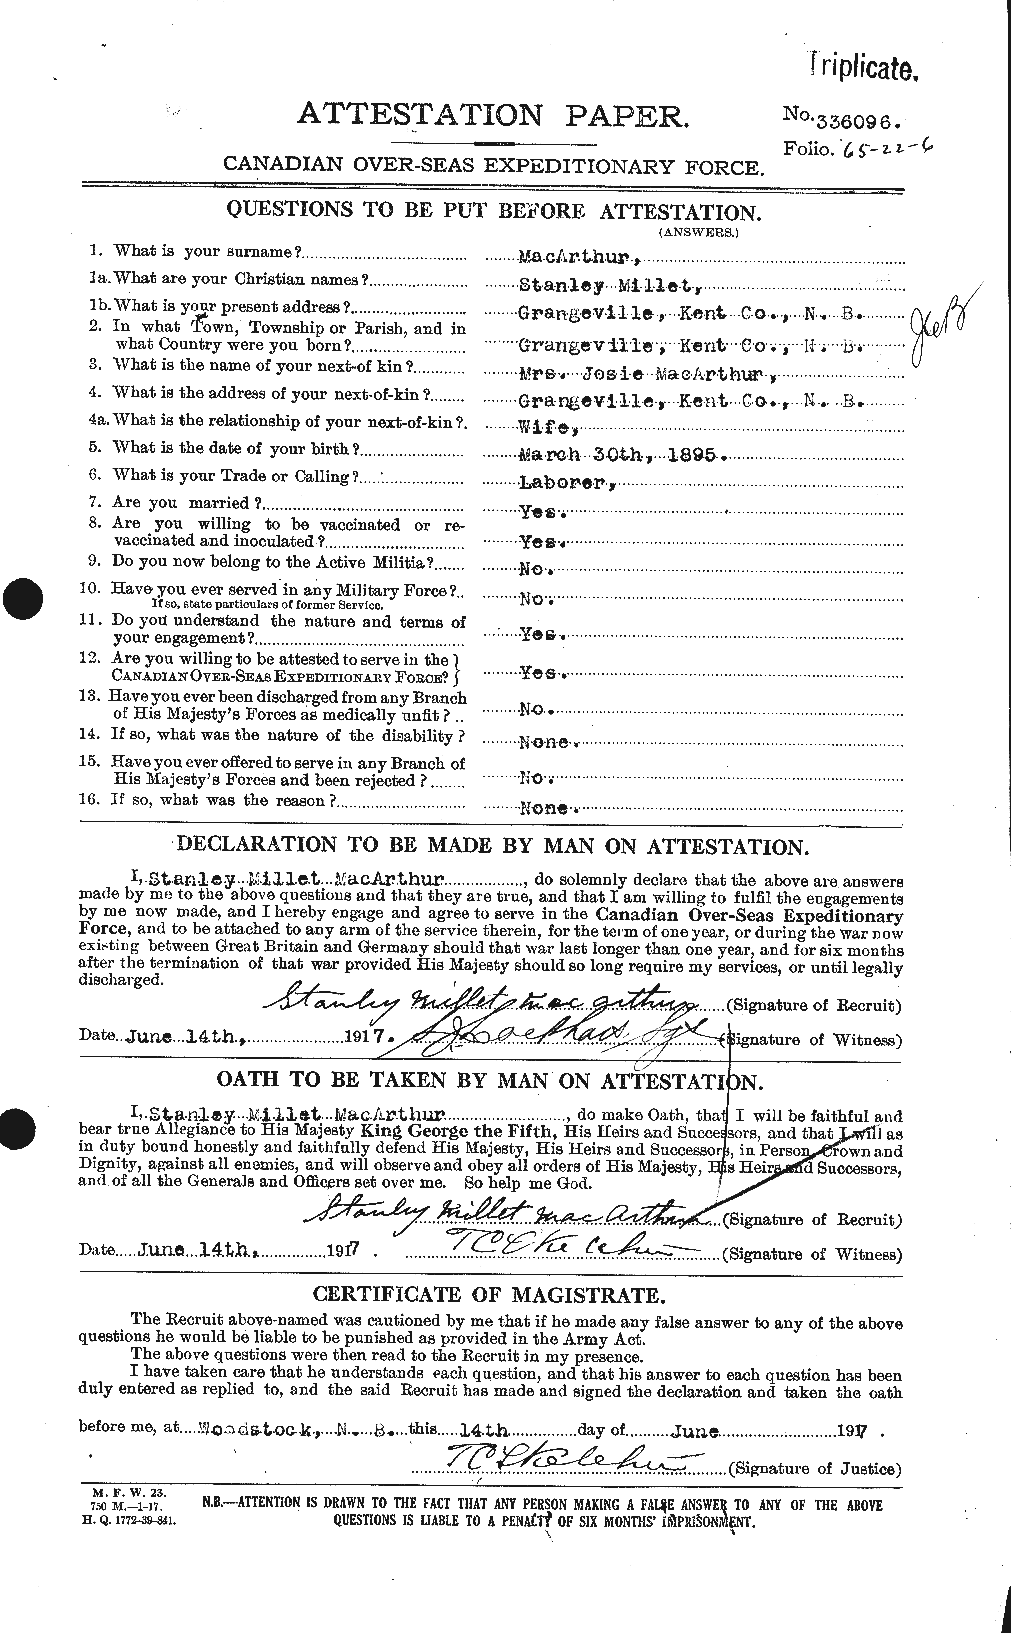 Personnel Records of the First World War - CEF 130644a